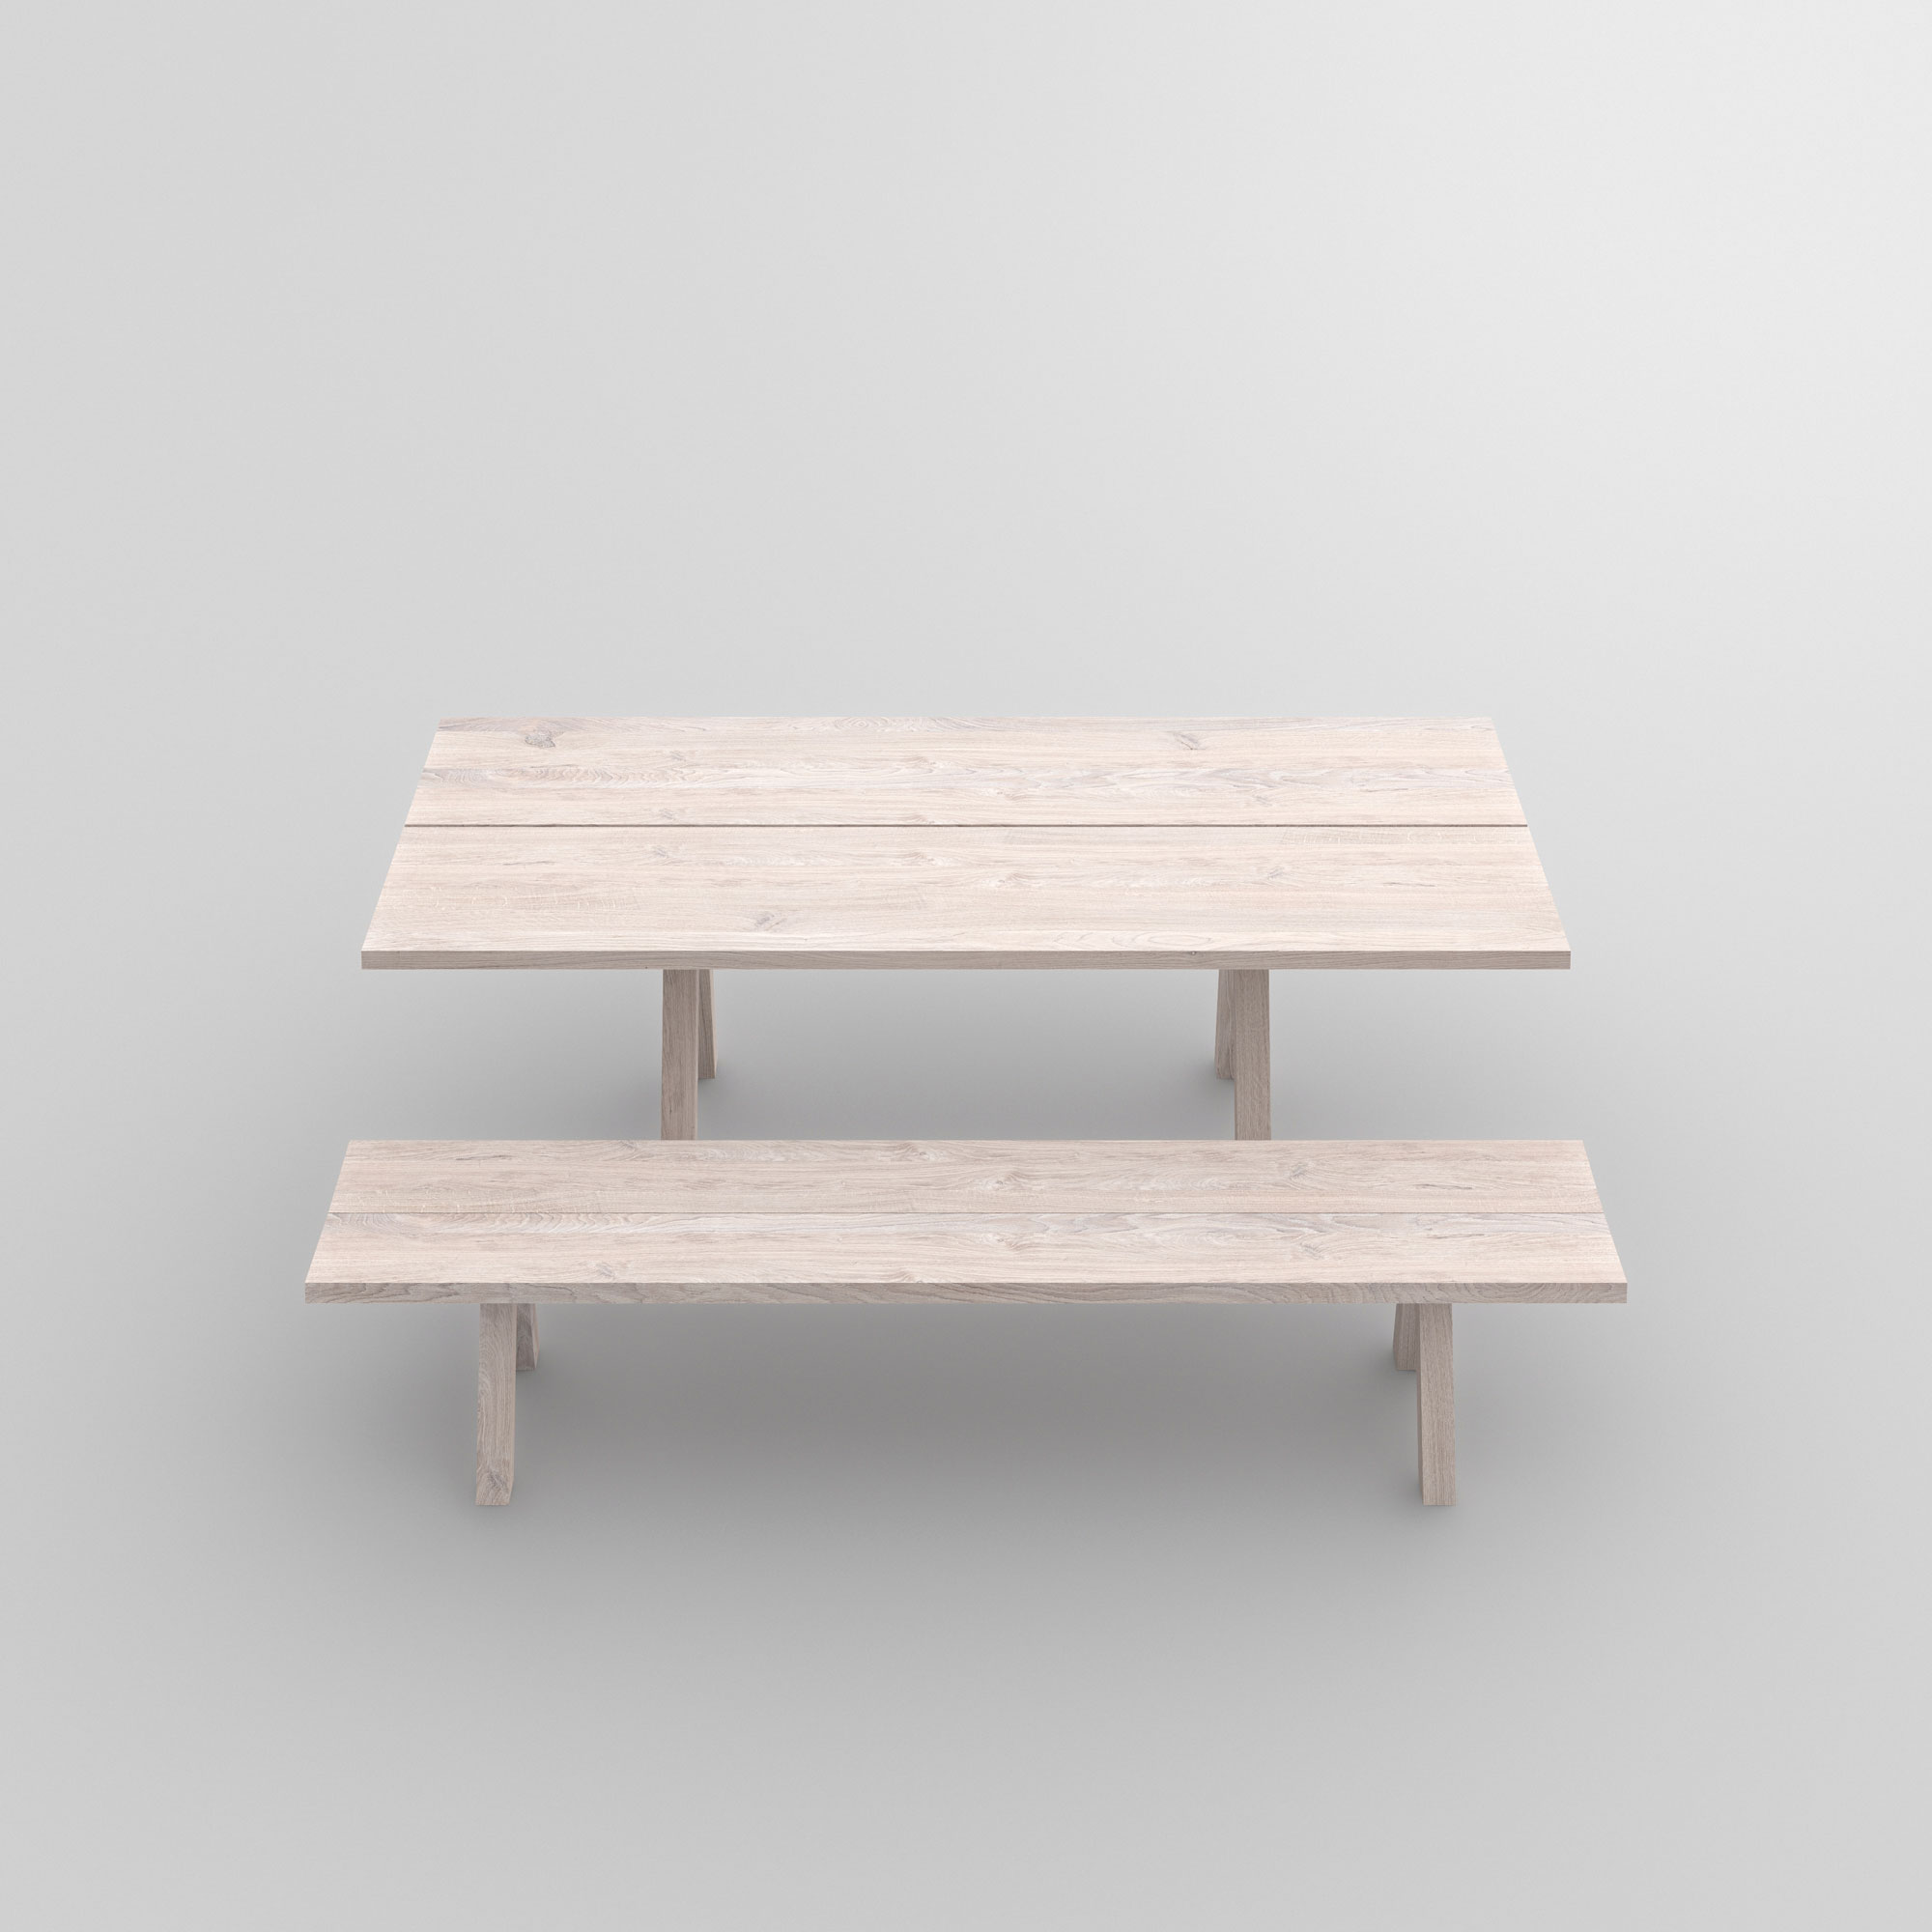 Tree Trunk Bench PAPILIO BASIC cam2 custom made in solid wood by vitamin design